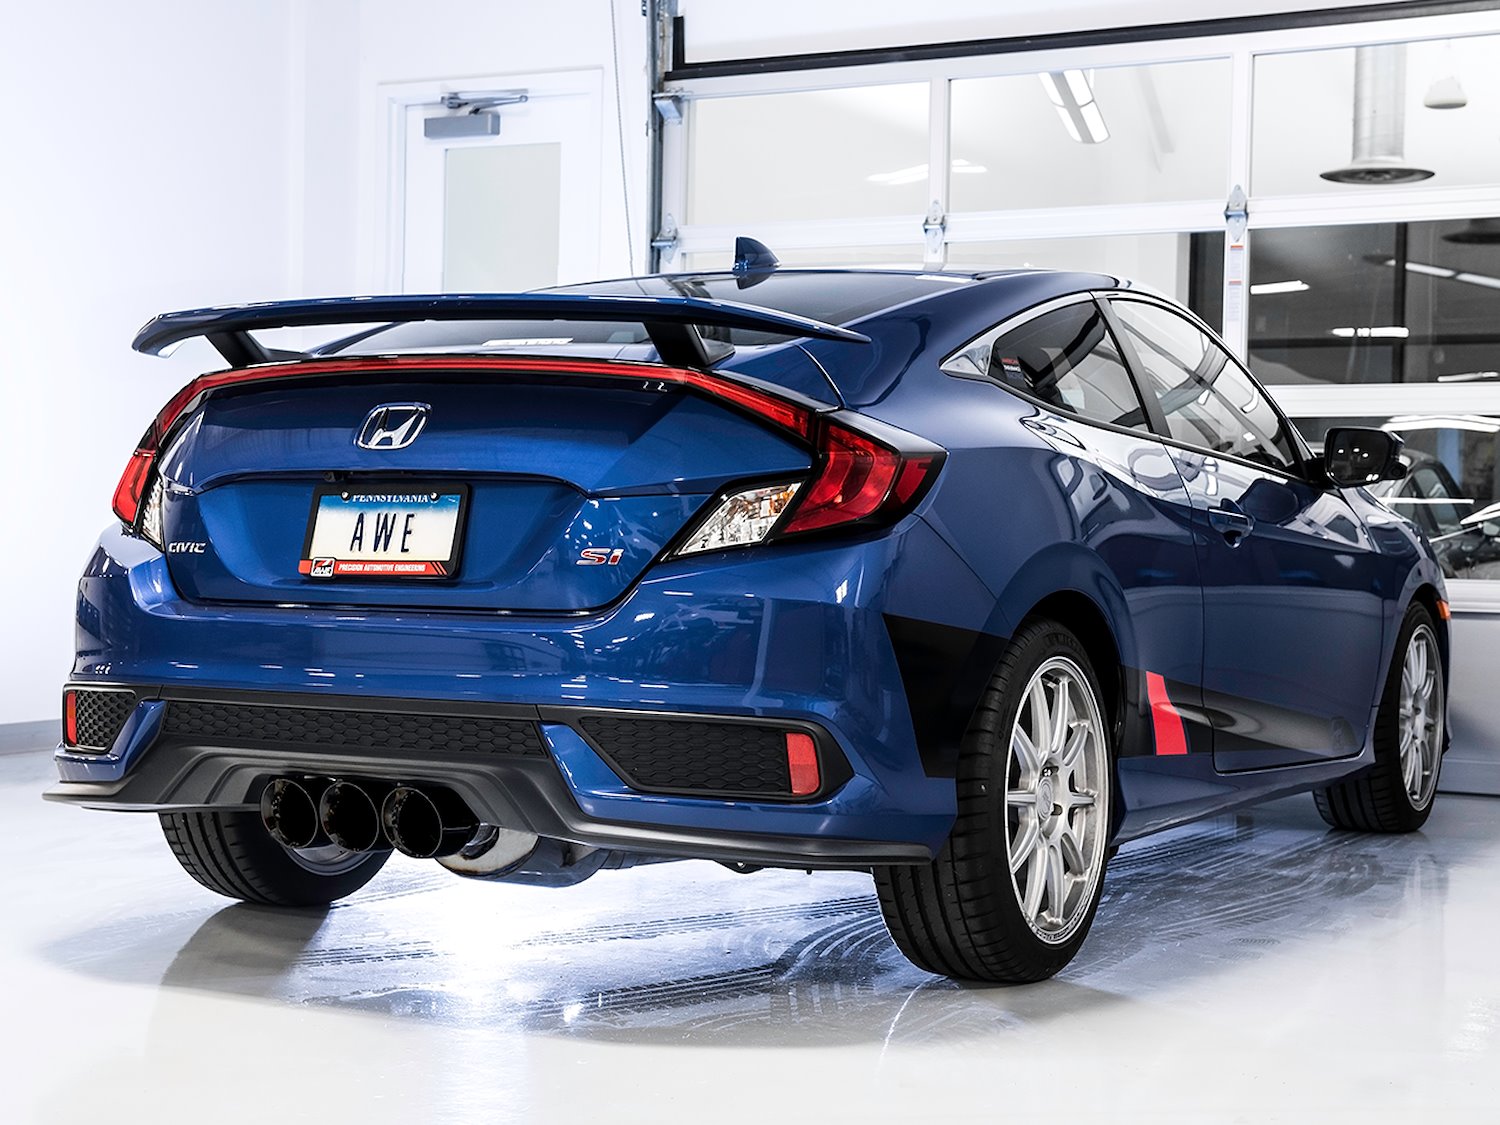 AWE Touring Edition Exhaust for 10th Gen Civic Si Coupe / Sedan (includes Front Pipe) - Triple Diamond Black Tips